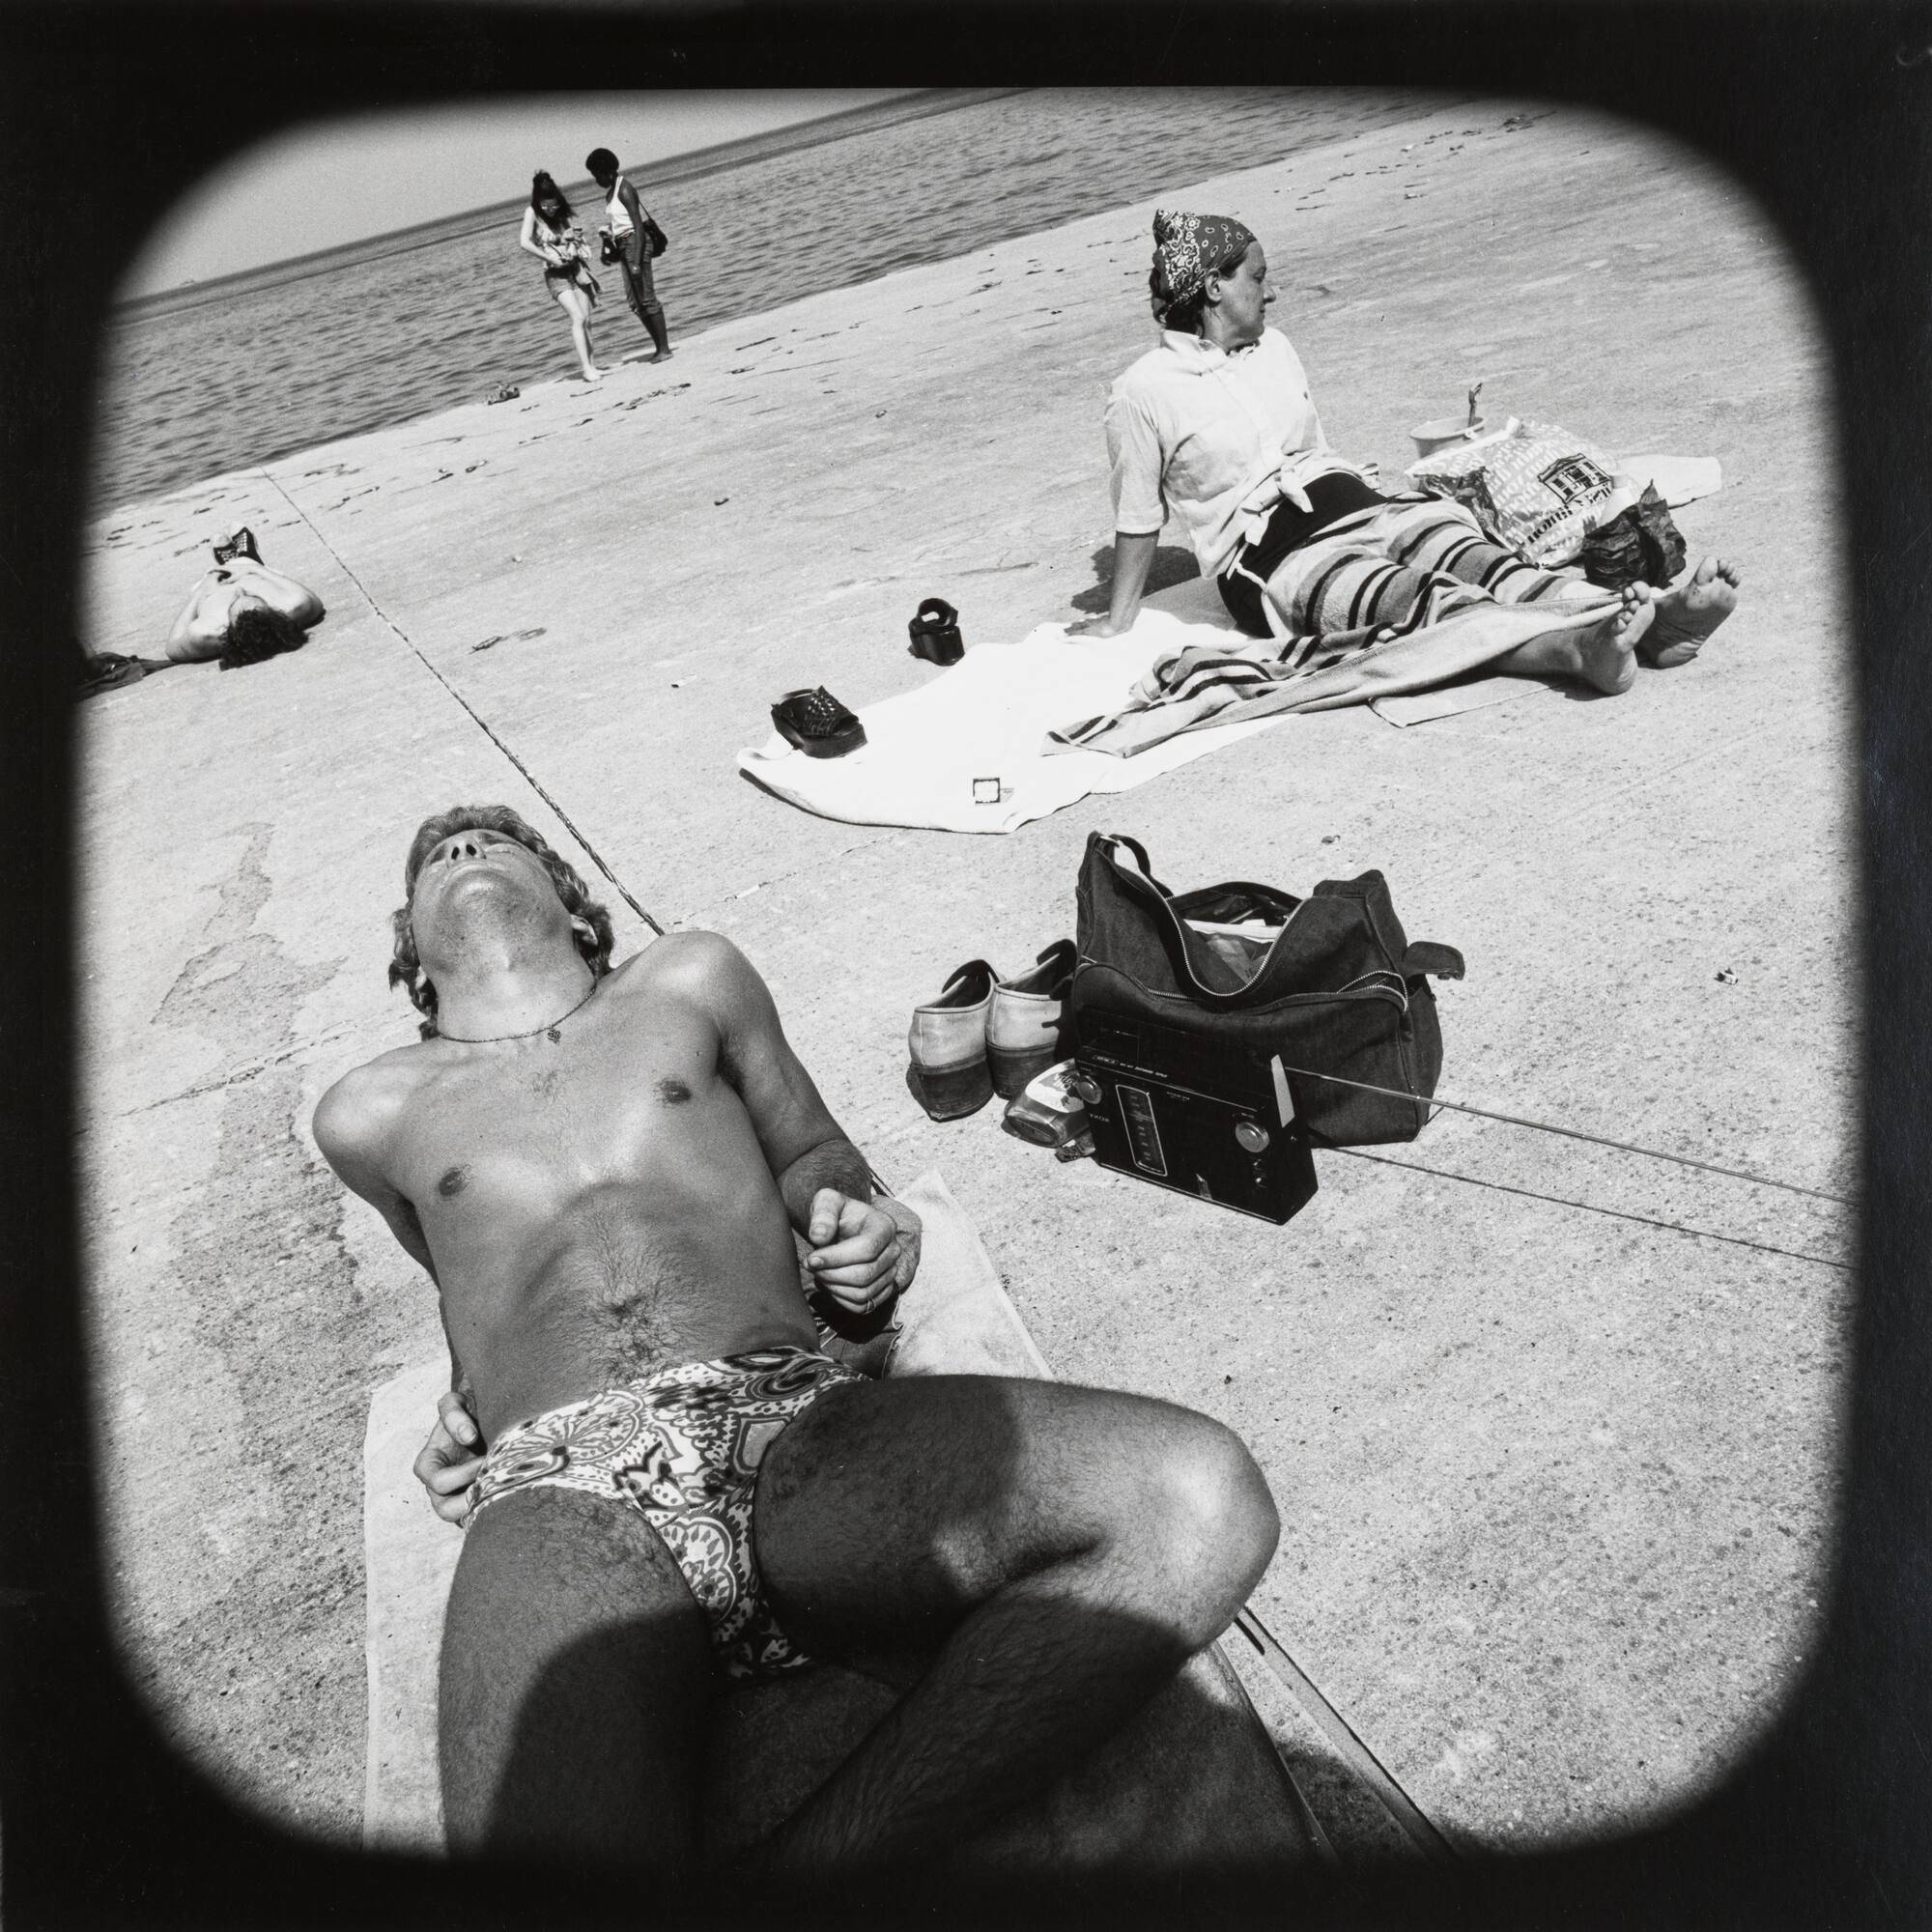 Scene at the beach focused on man on towel leaning back and looking up at the sun